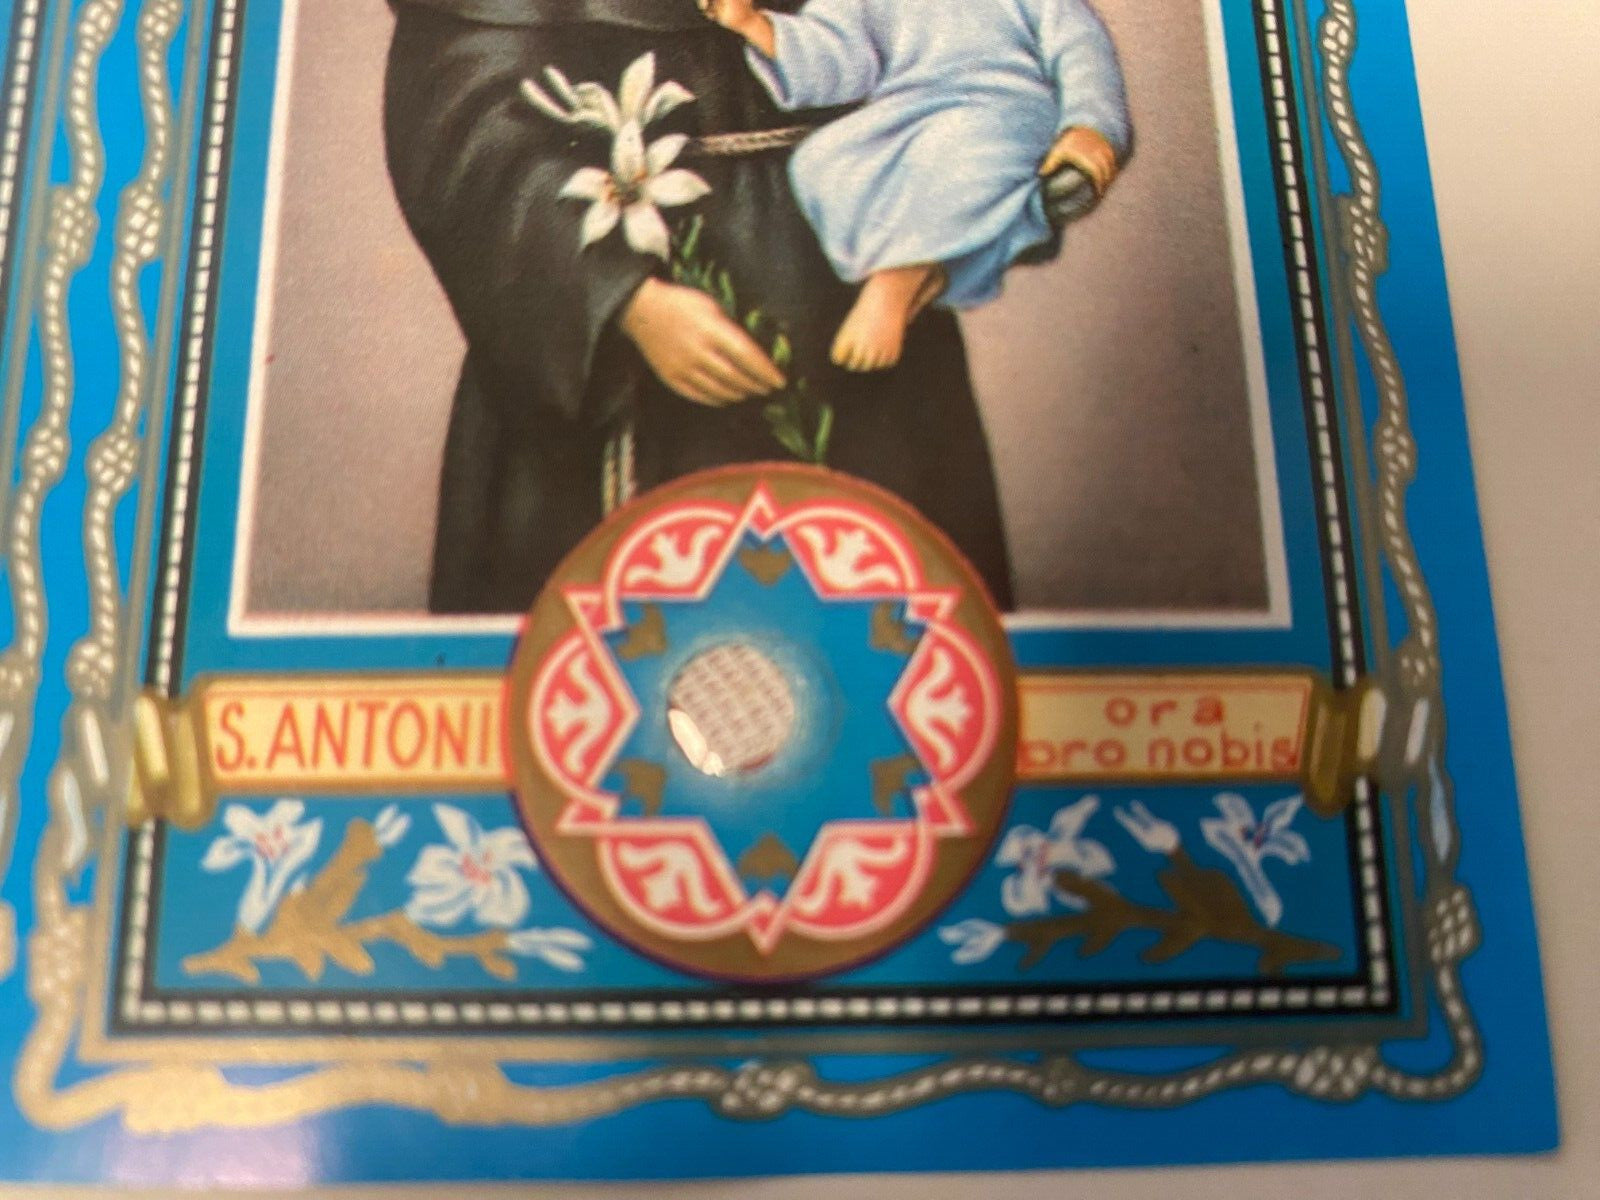 Saint Anthony 3rd Class Relic/Prayer Card Folder, New from Italy - Bob and Penny Lord